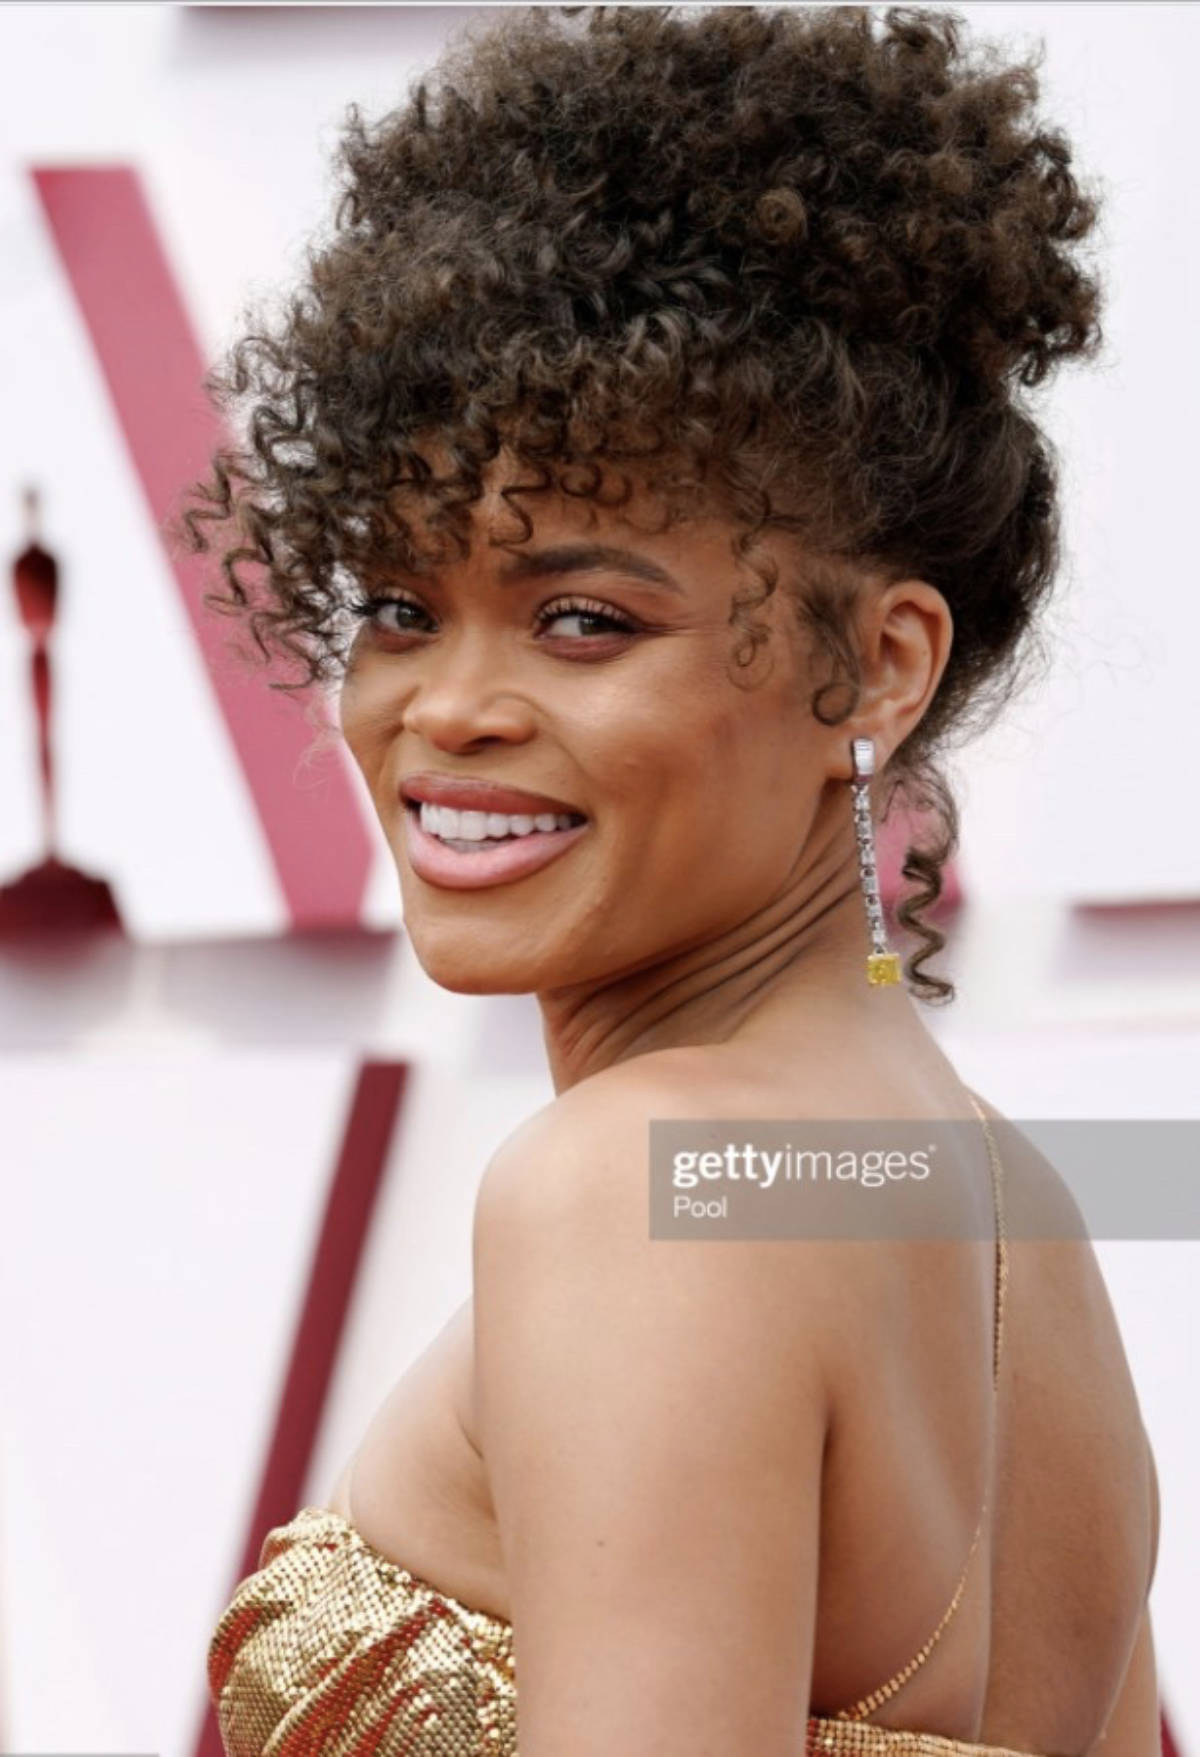 Andra Day In Over $2 Million Worth Of Tiffany & Co. Diamonds At The 2021 Academy Awards